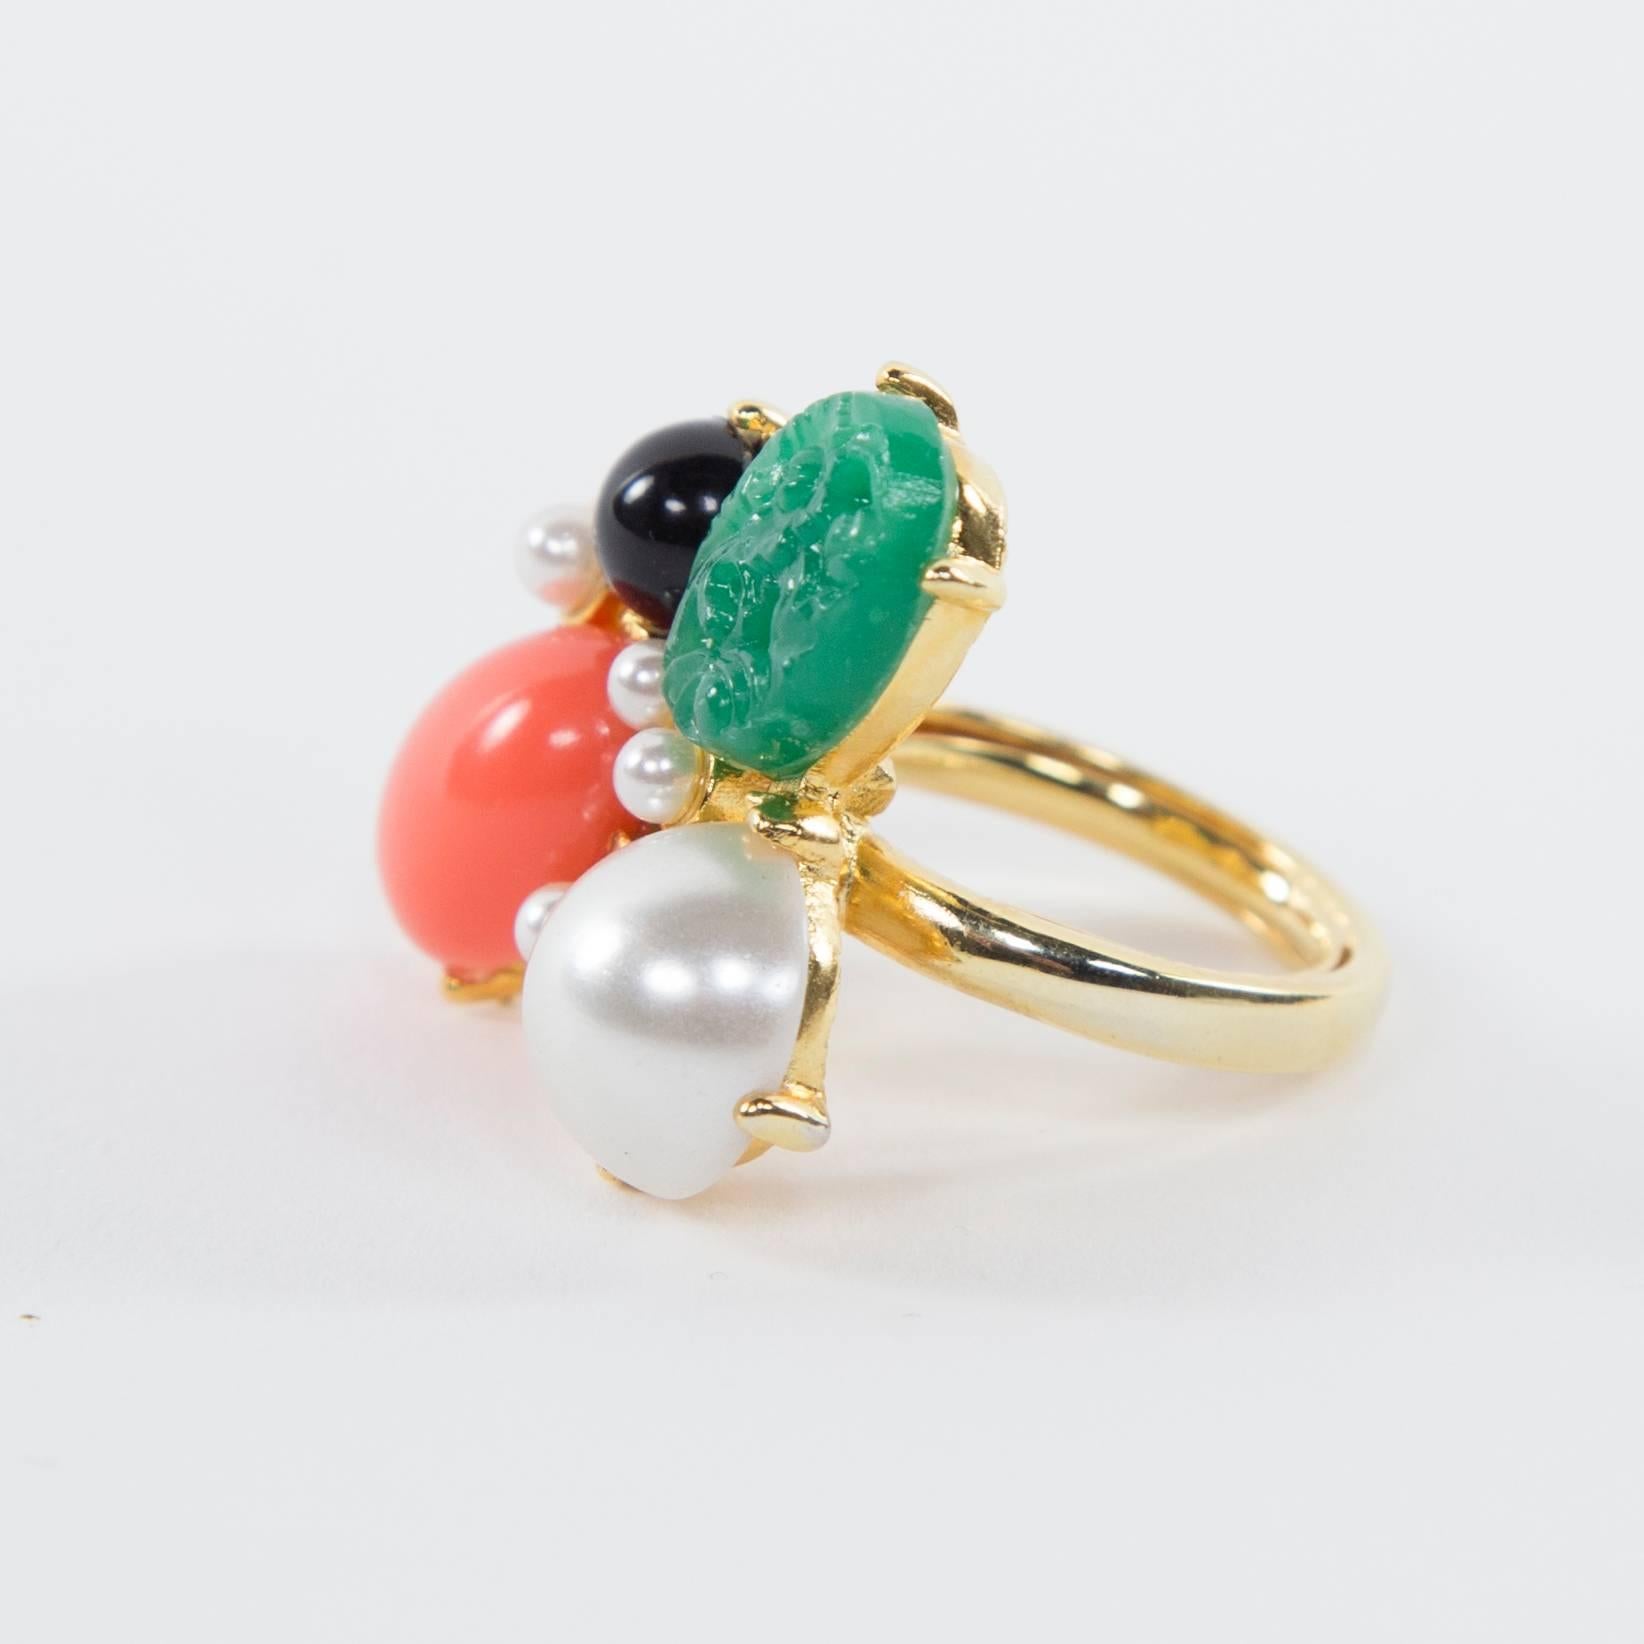 Beautiful signed Kenneth J Lane Luxurious and Exotic carved Glass Jade, Faux Coral and Pearl Ring with the true appearance of Natural Jade, Coral and Pearl; Rare, Highly Coveted & Iconic Piece. Signed & Made In USA. Very Luxurious with the True look